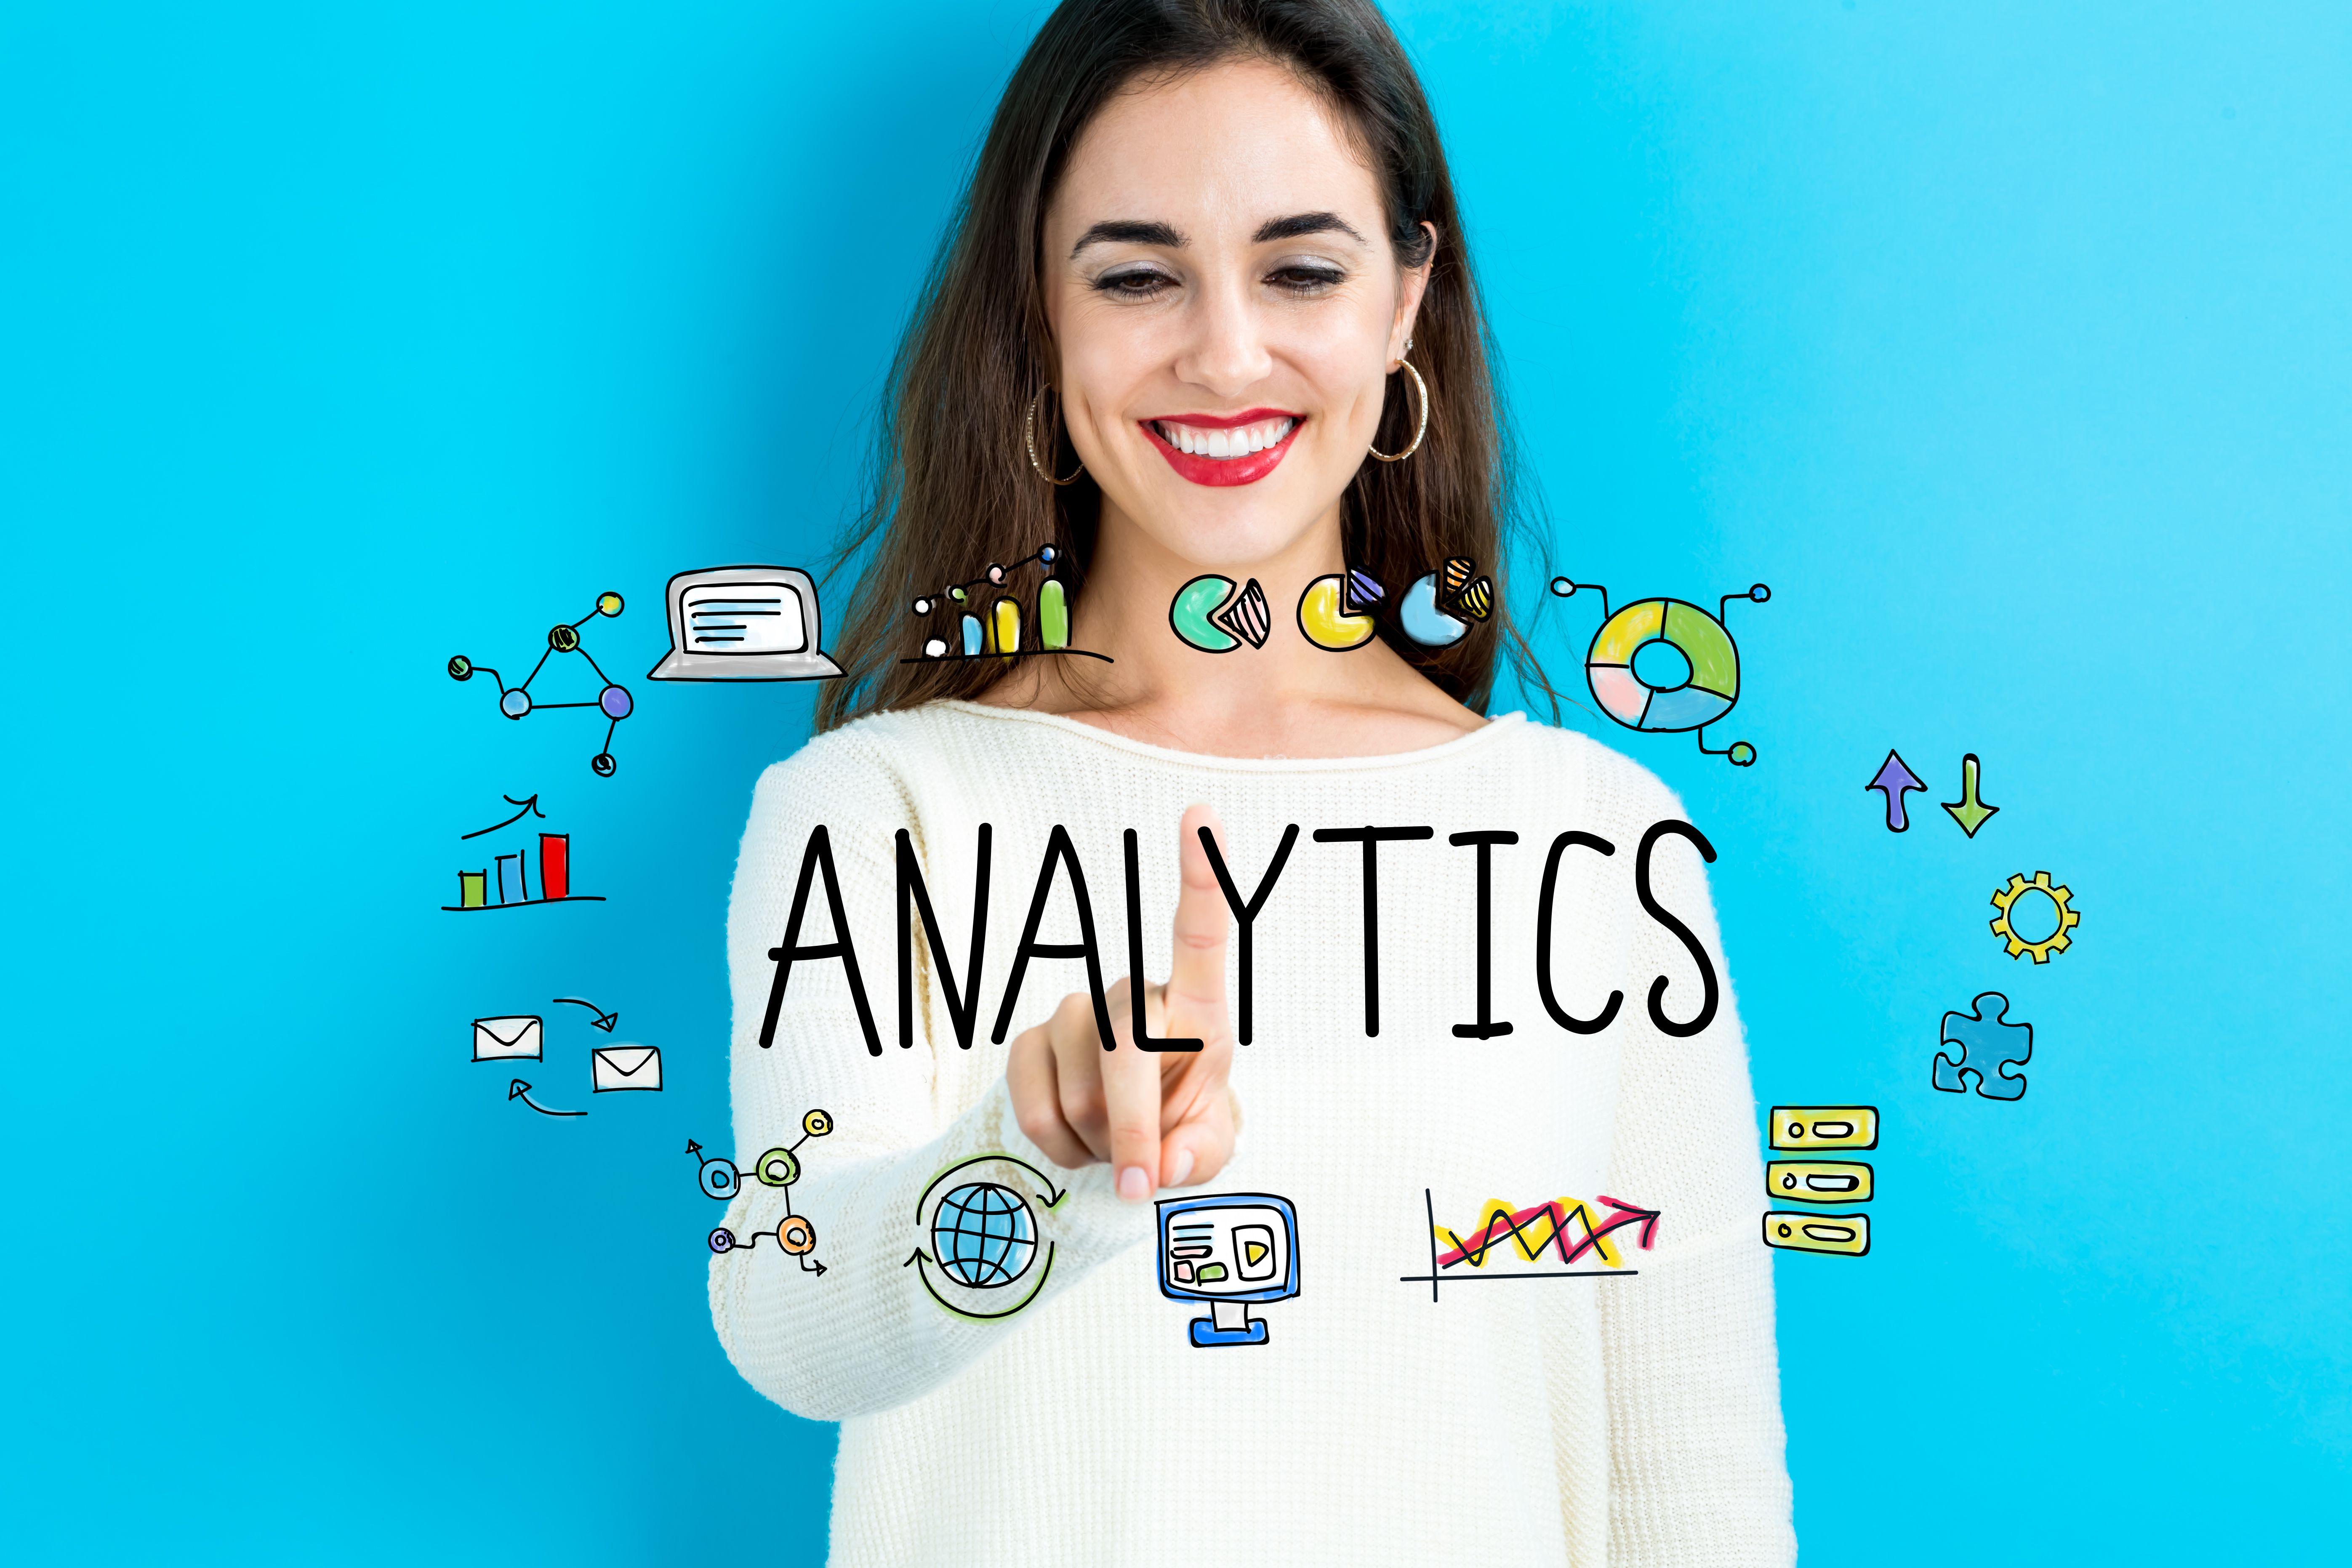 8 Tips to Use Google Analytics to Better Understand Your Audience